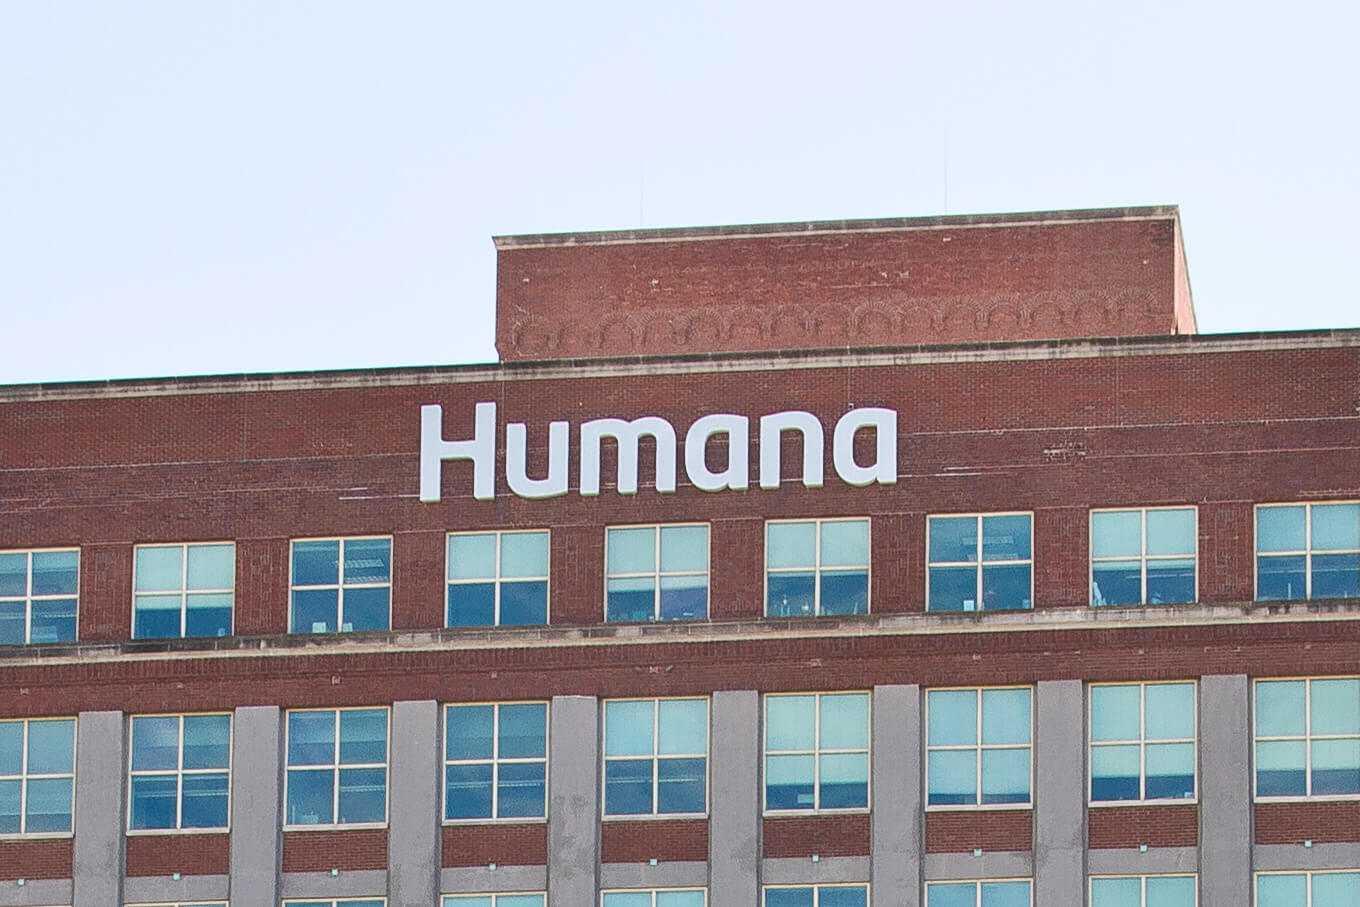 Humana Fee Schedule 2022 Humana Launching 72 New Medicare Plans For 2022 | Fierce Healthcare